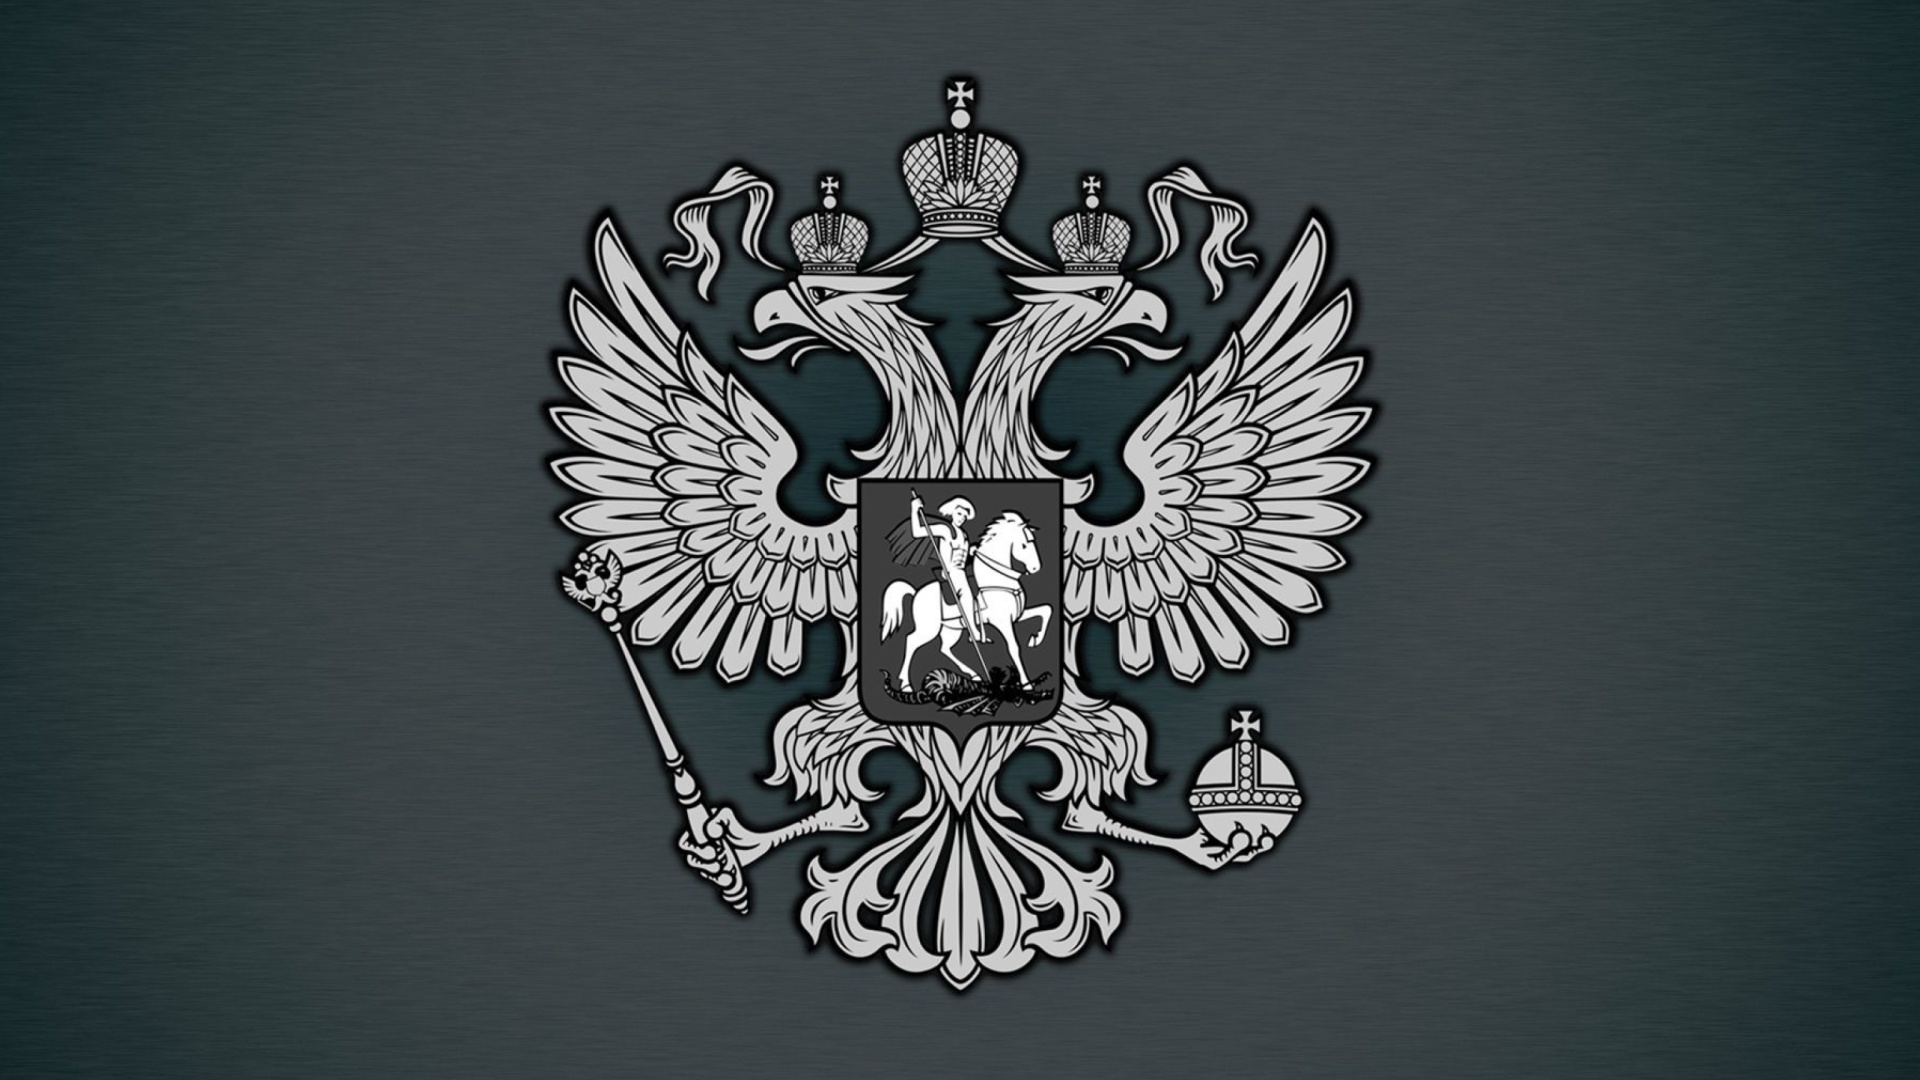 Coat of arms of Russia wallpaper 1920x1080